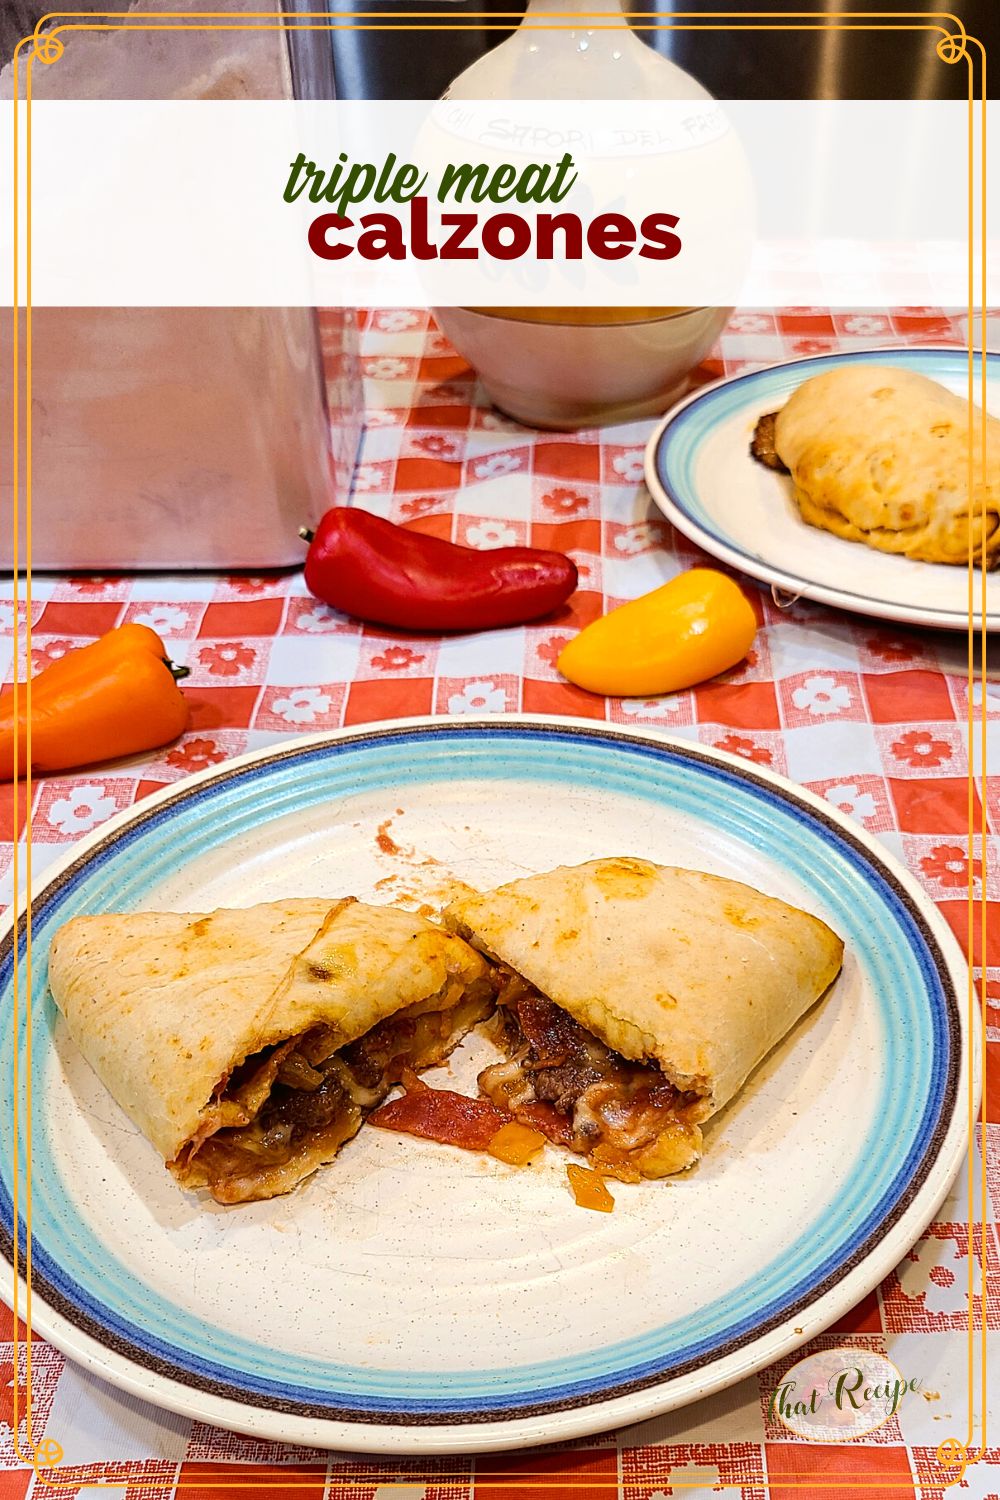 calzone on a plate with text overlay triple meat calzones